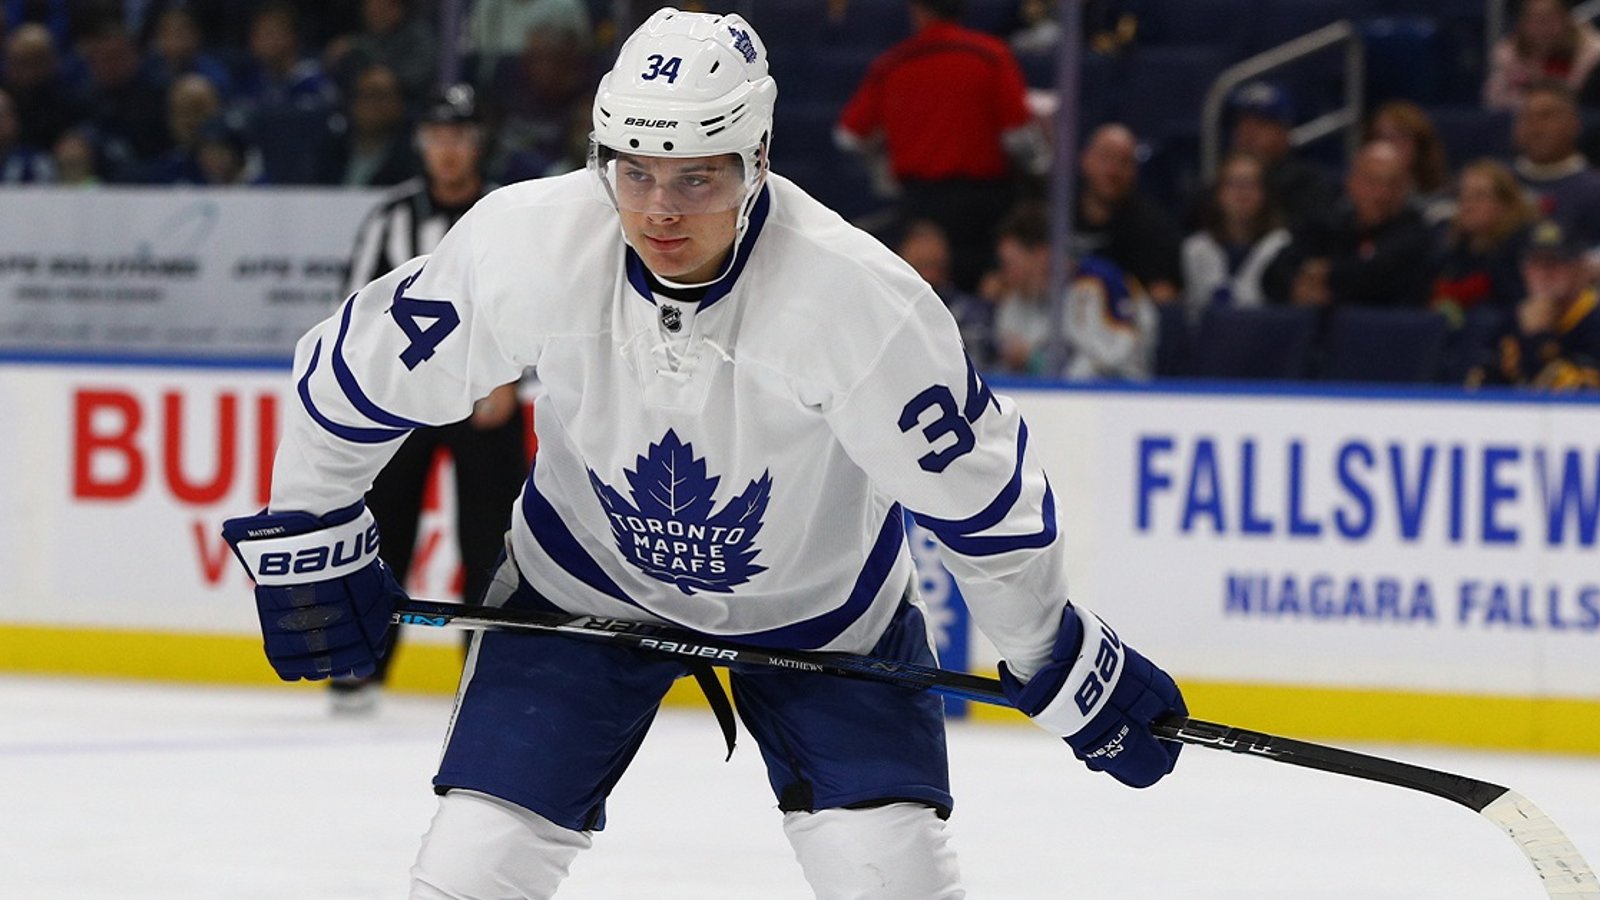 Steve Simmons and Auston Matthews go after each other following Leafs' 6-5  win - HockeyFeed